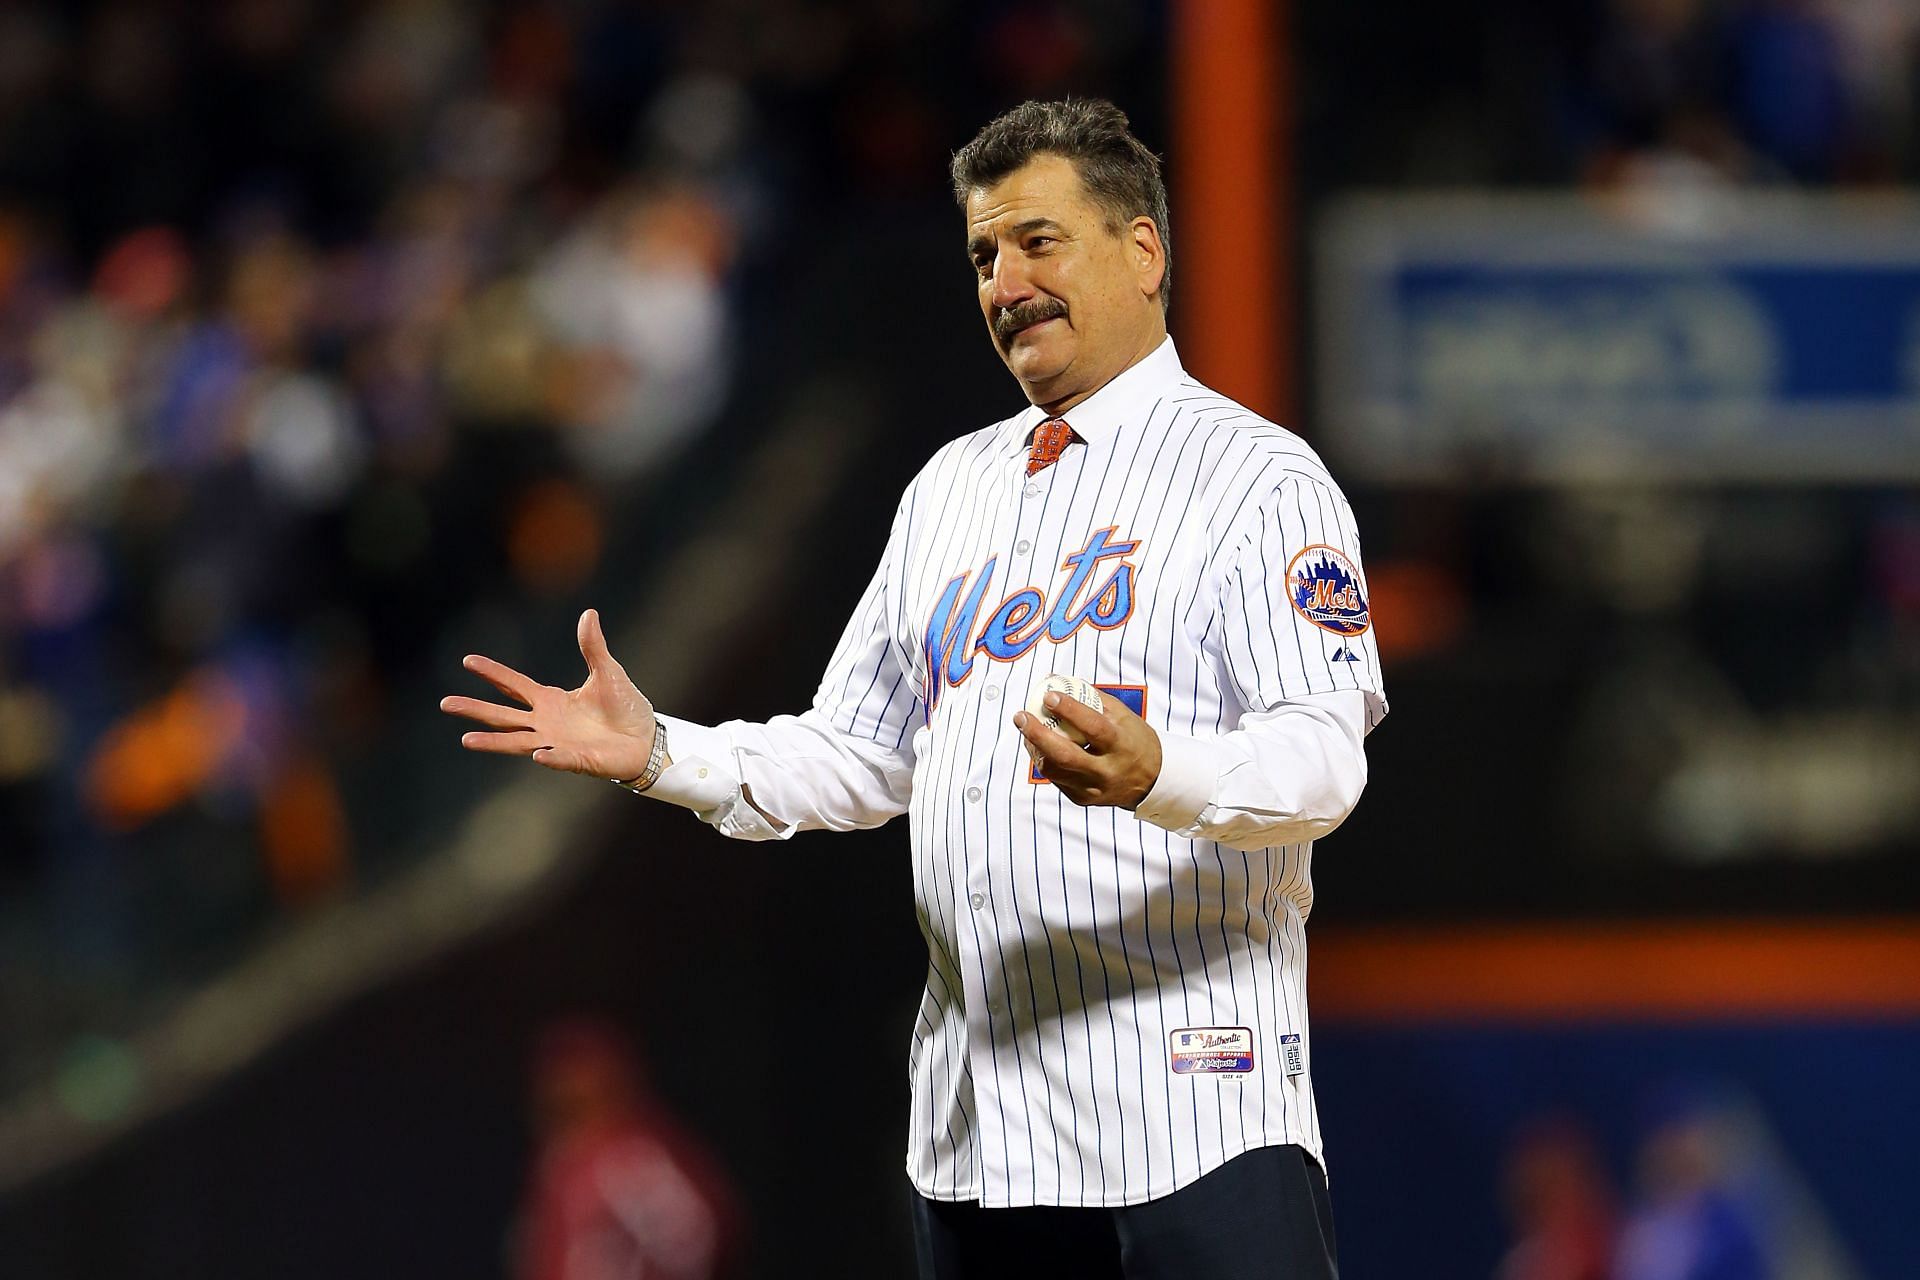 Sending a get well soon & best wishes to our very own Keith Hernandez -  Mets legend and SNY analyst Keith Hernandez to miss rest of the season due  to shoulder injury